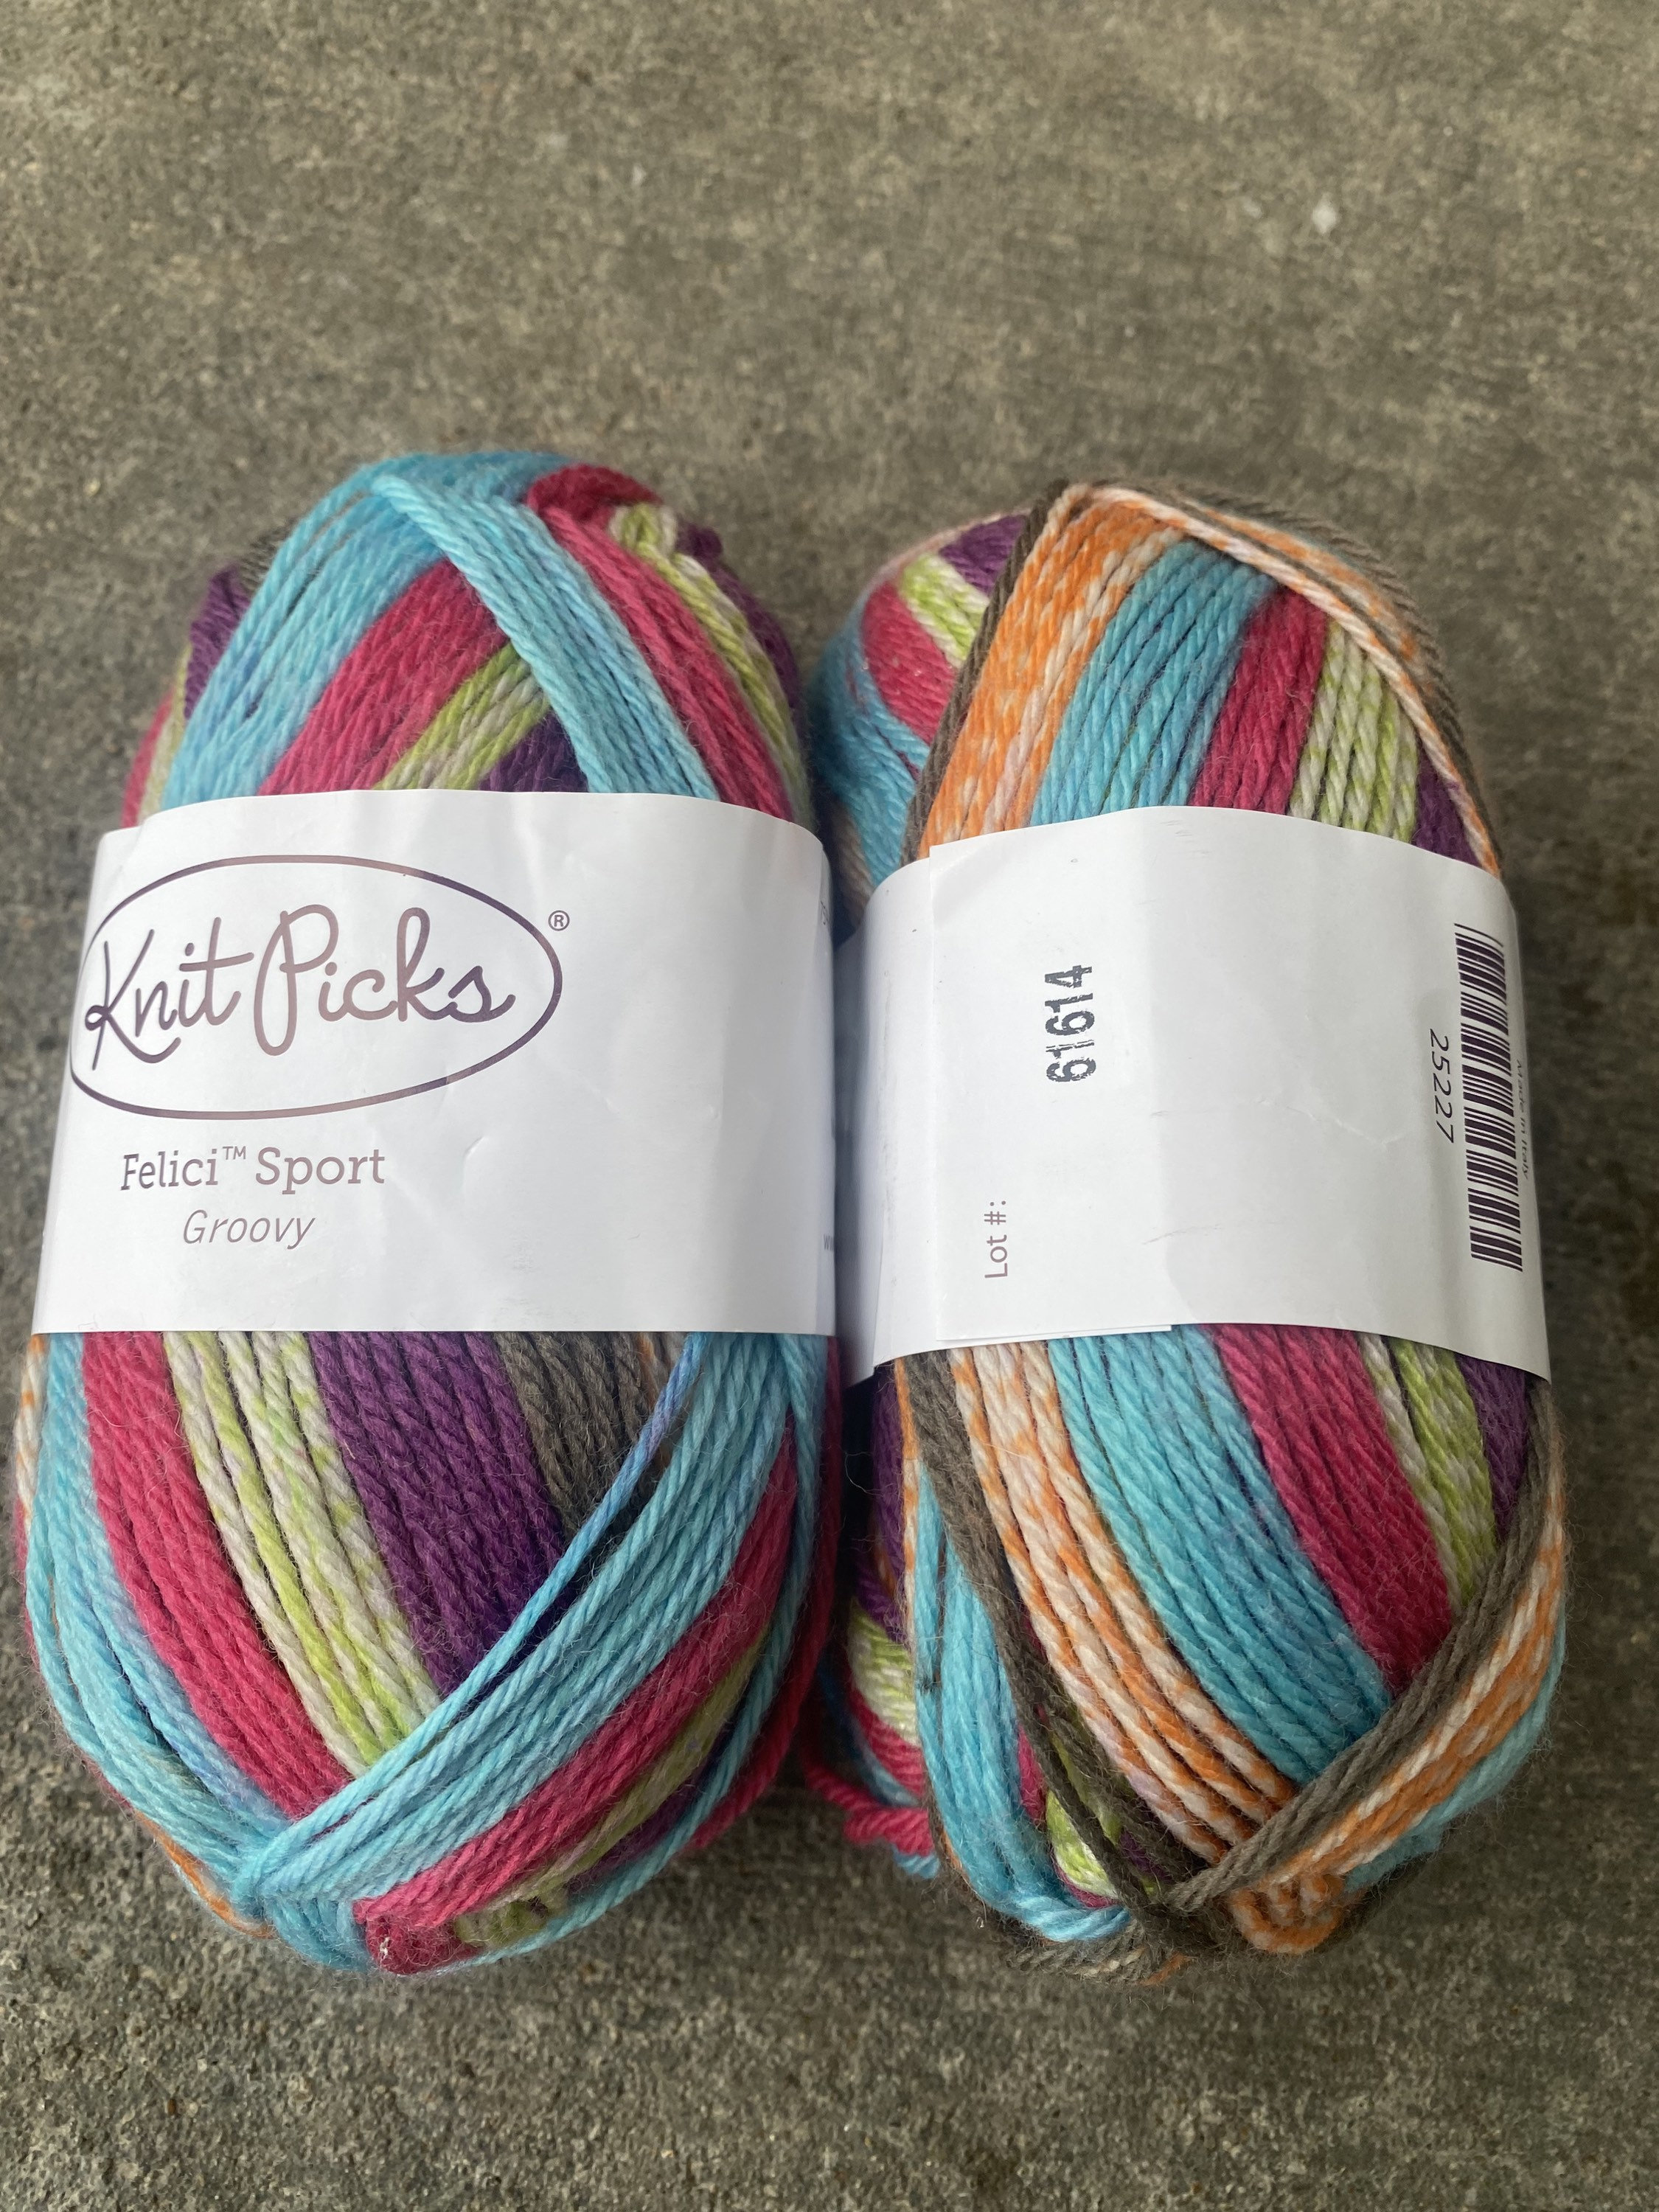 Ultimate Knit Picks Yarn & Needle Review - Bellewood Cottage